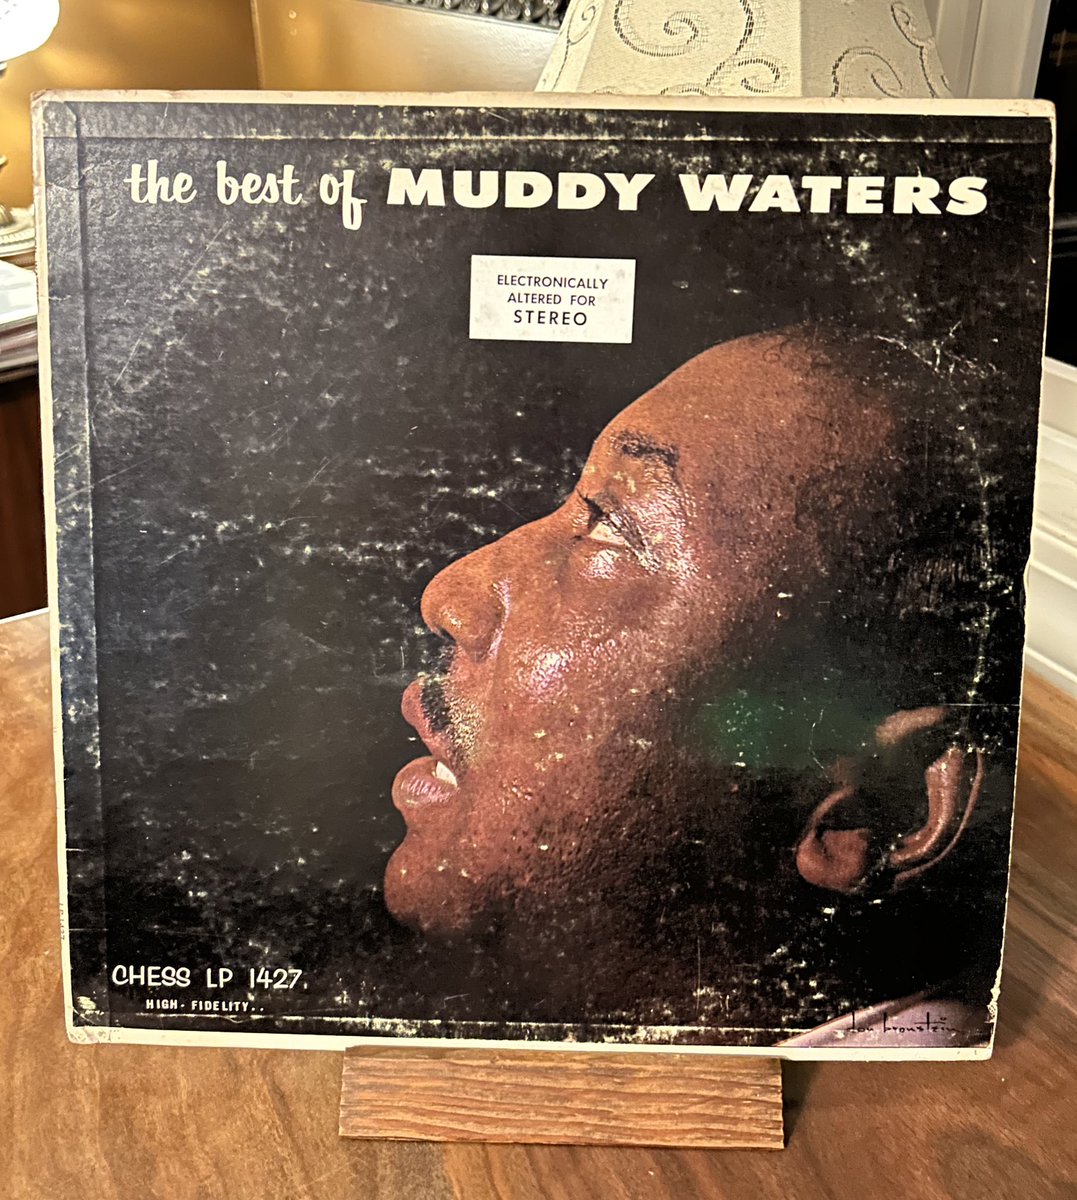 the best of MUDDY WATERS #MuddyWaters @BluesMusicNews @BluesMusicMag @SharpBlues #NowPlaying #vinylcommunity #vinylrecords Muddy was the original, he set the standard. 1958 release